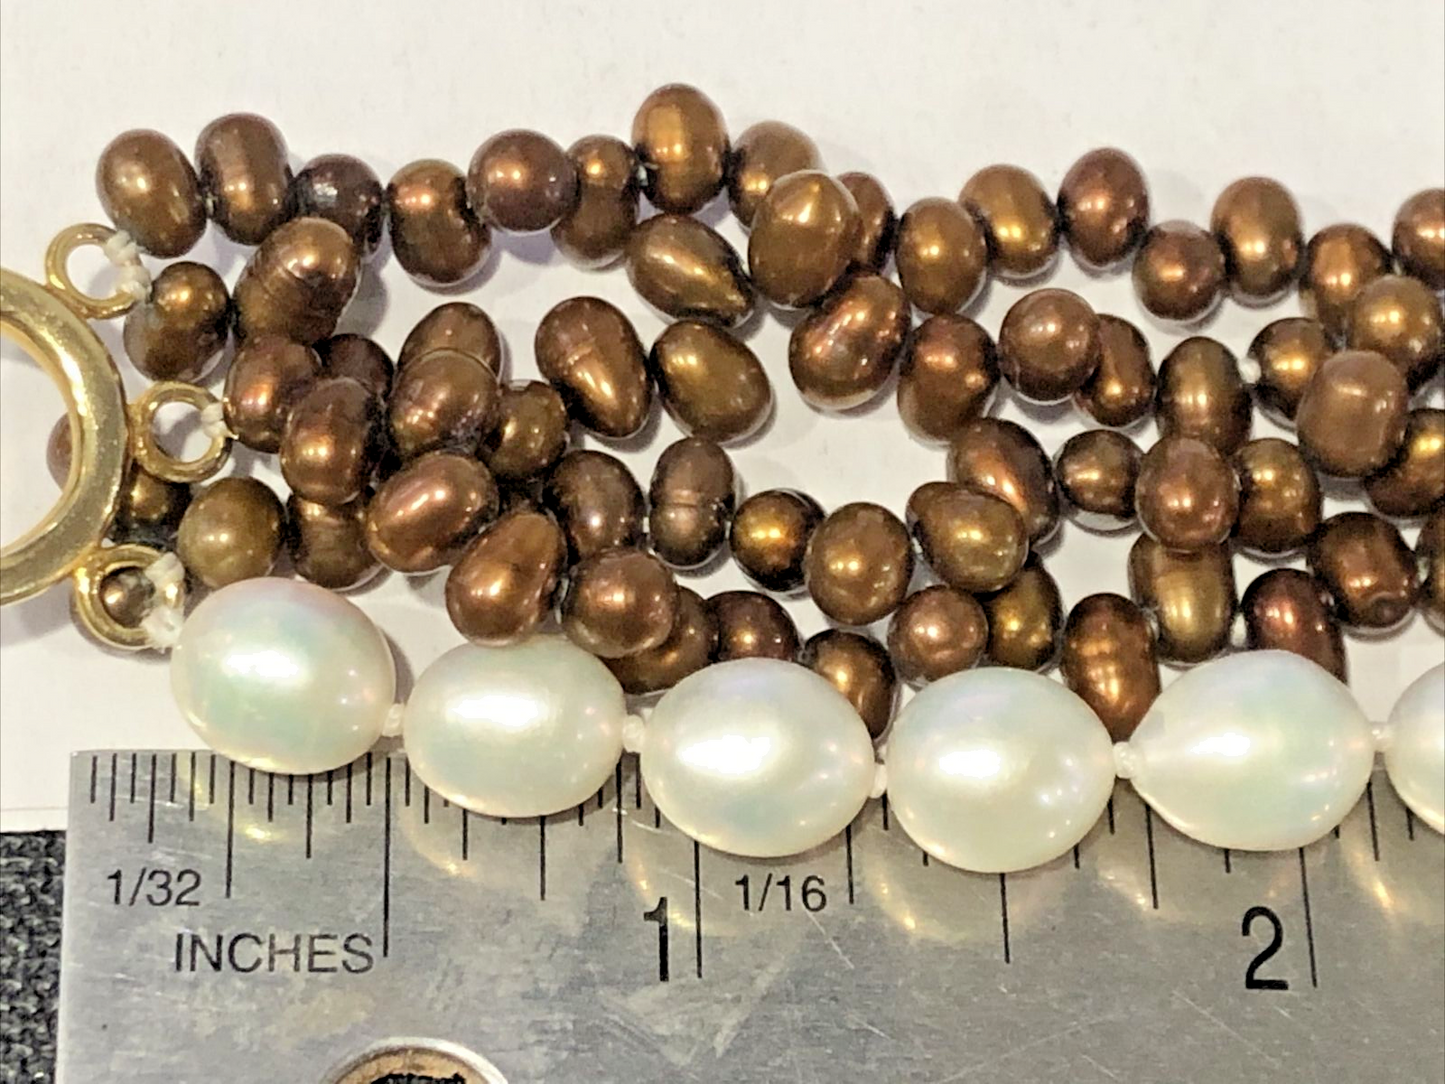 Freshwater Pearl Bronze white Bead 5 Strand necklace